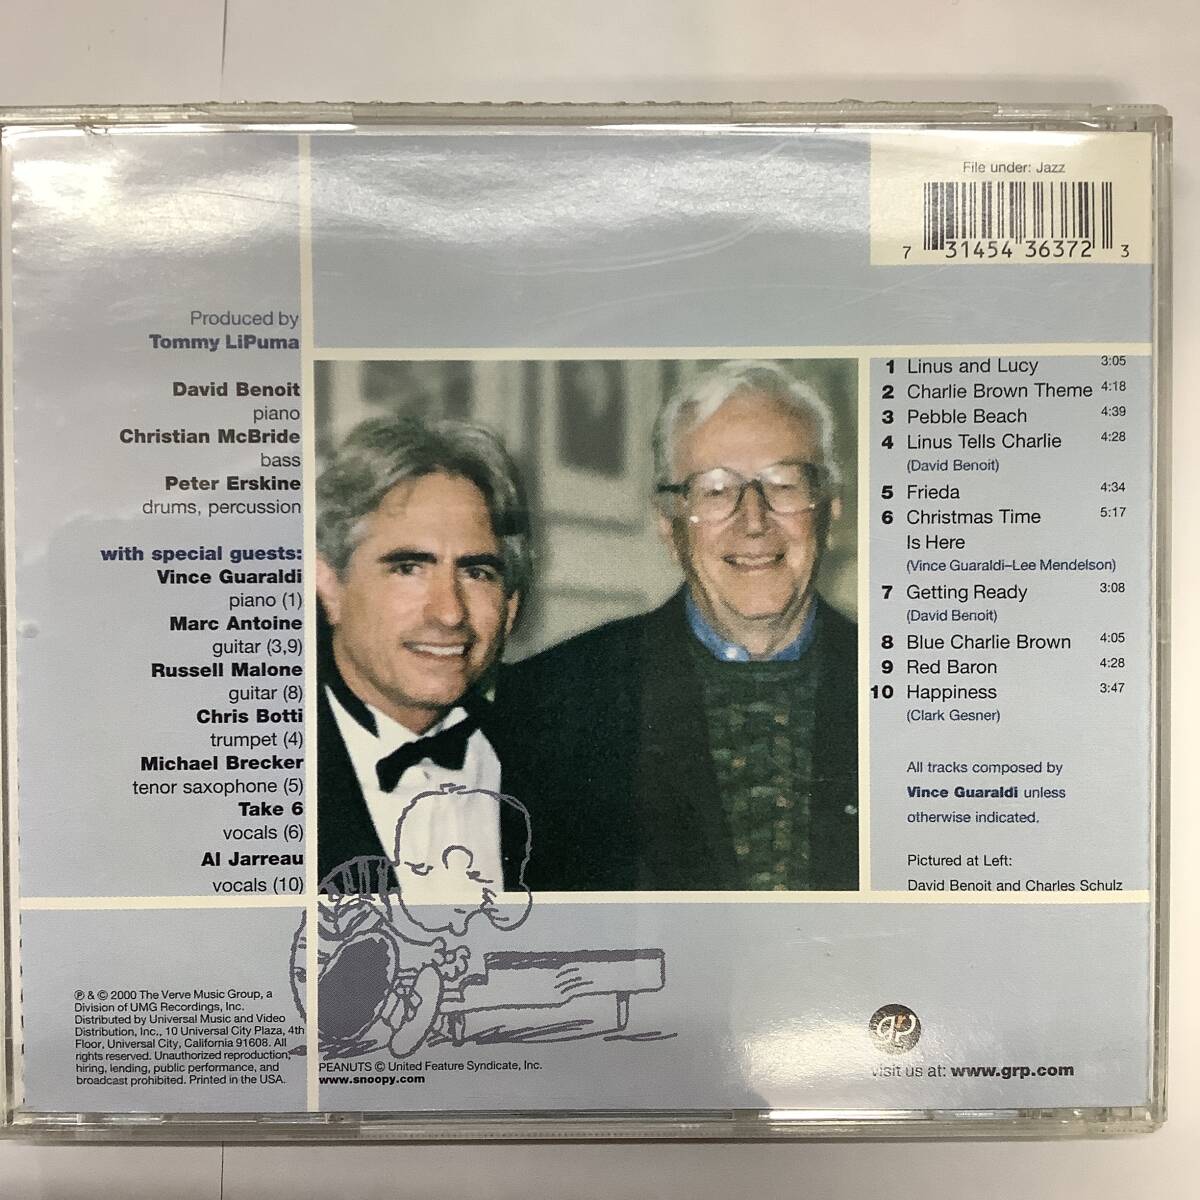 DavidBenoit Here’s to You Charlie Brown 50 Great Years 輸入盤CD 314543637-2 デイヴィッド ベノワ_画像2